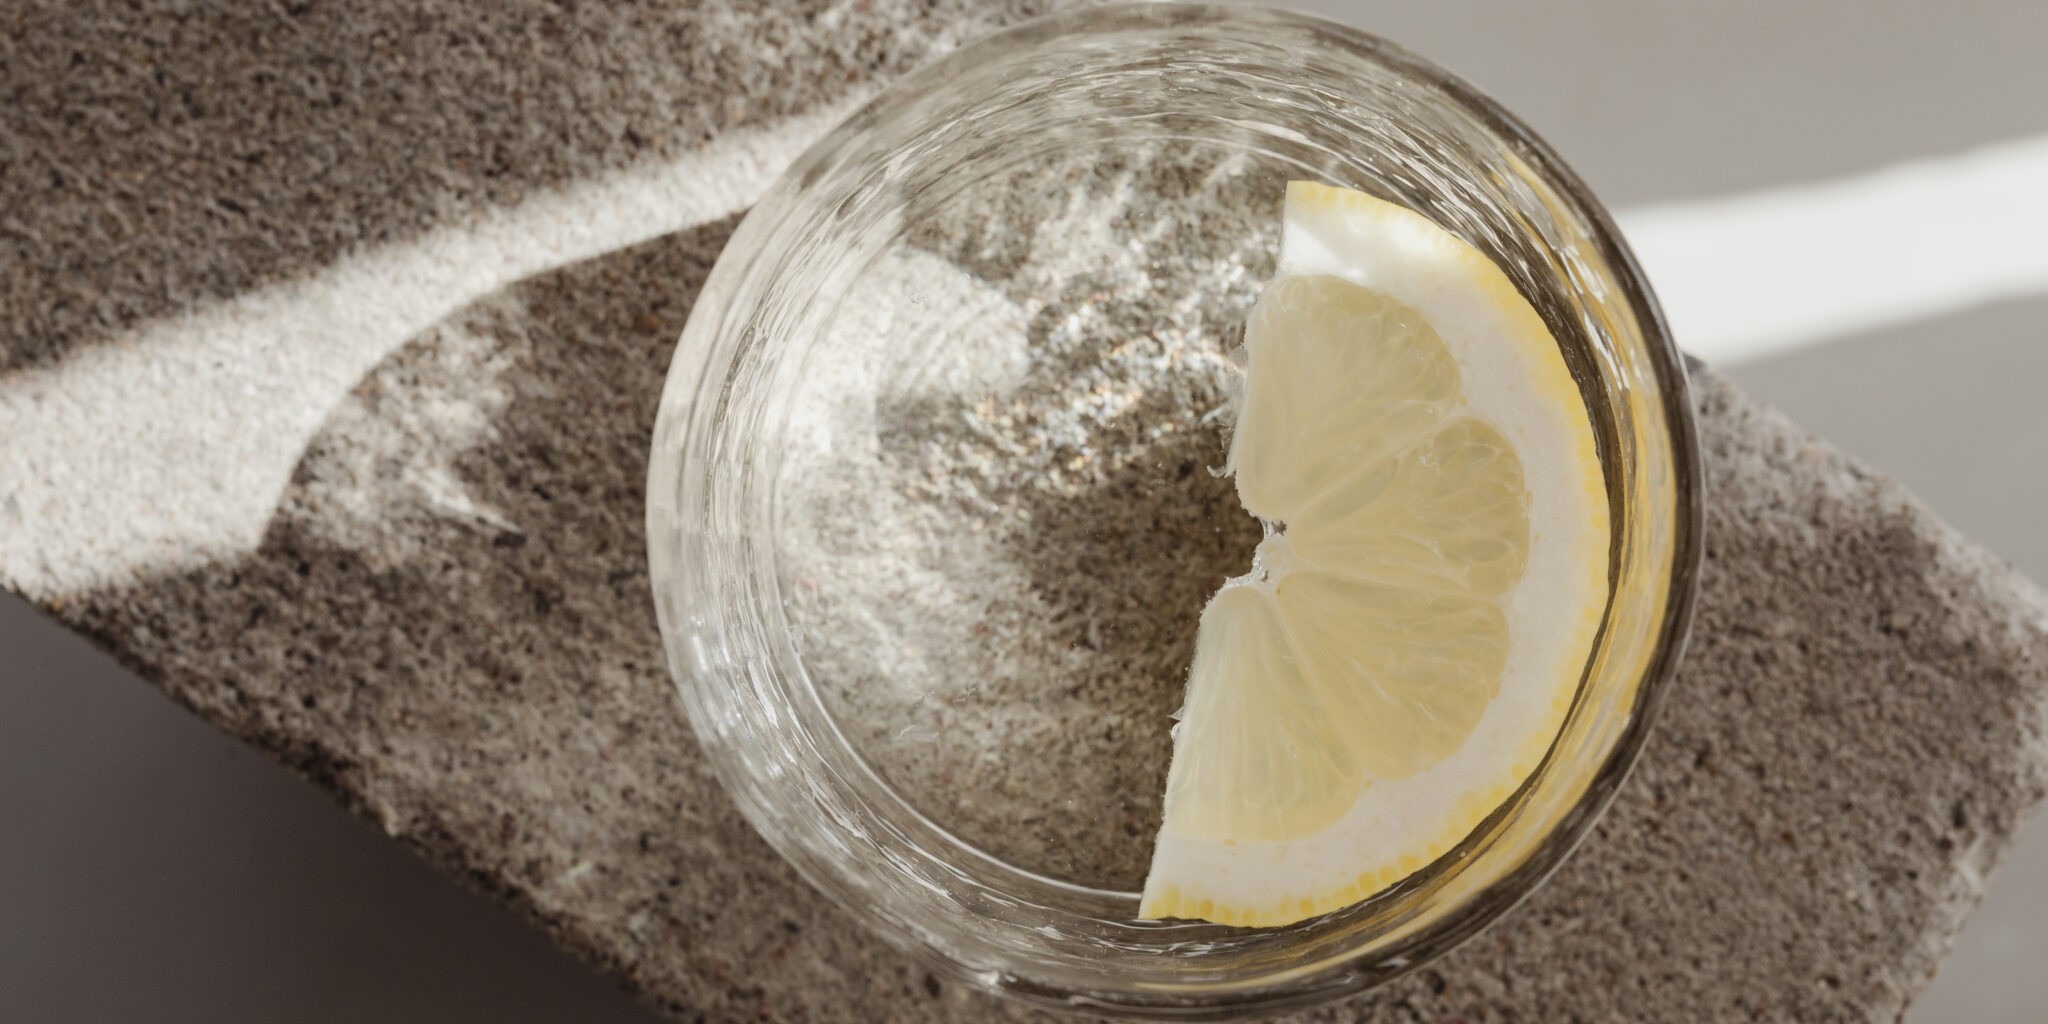 Top view of an unbranded glass of water with a lemon slice on a stone-textured surface against a light curtain background, conveying a brand-free, refreshing, and elegant vibe, as an intro to my article 'A deep dive into branding'